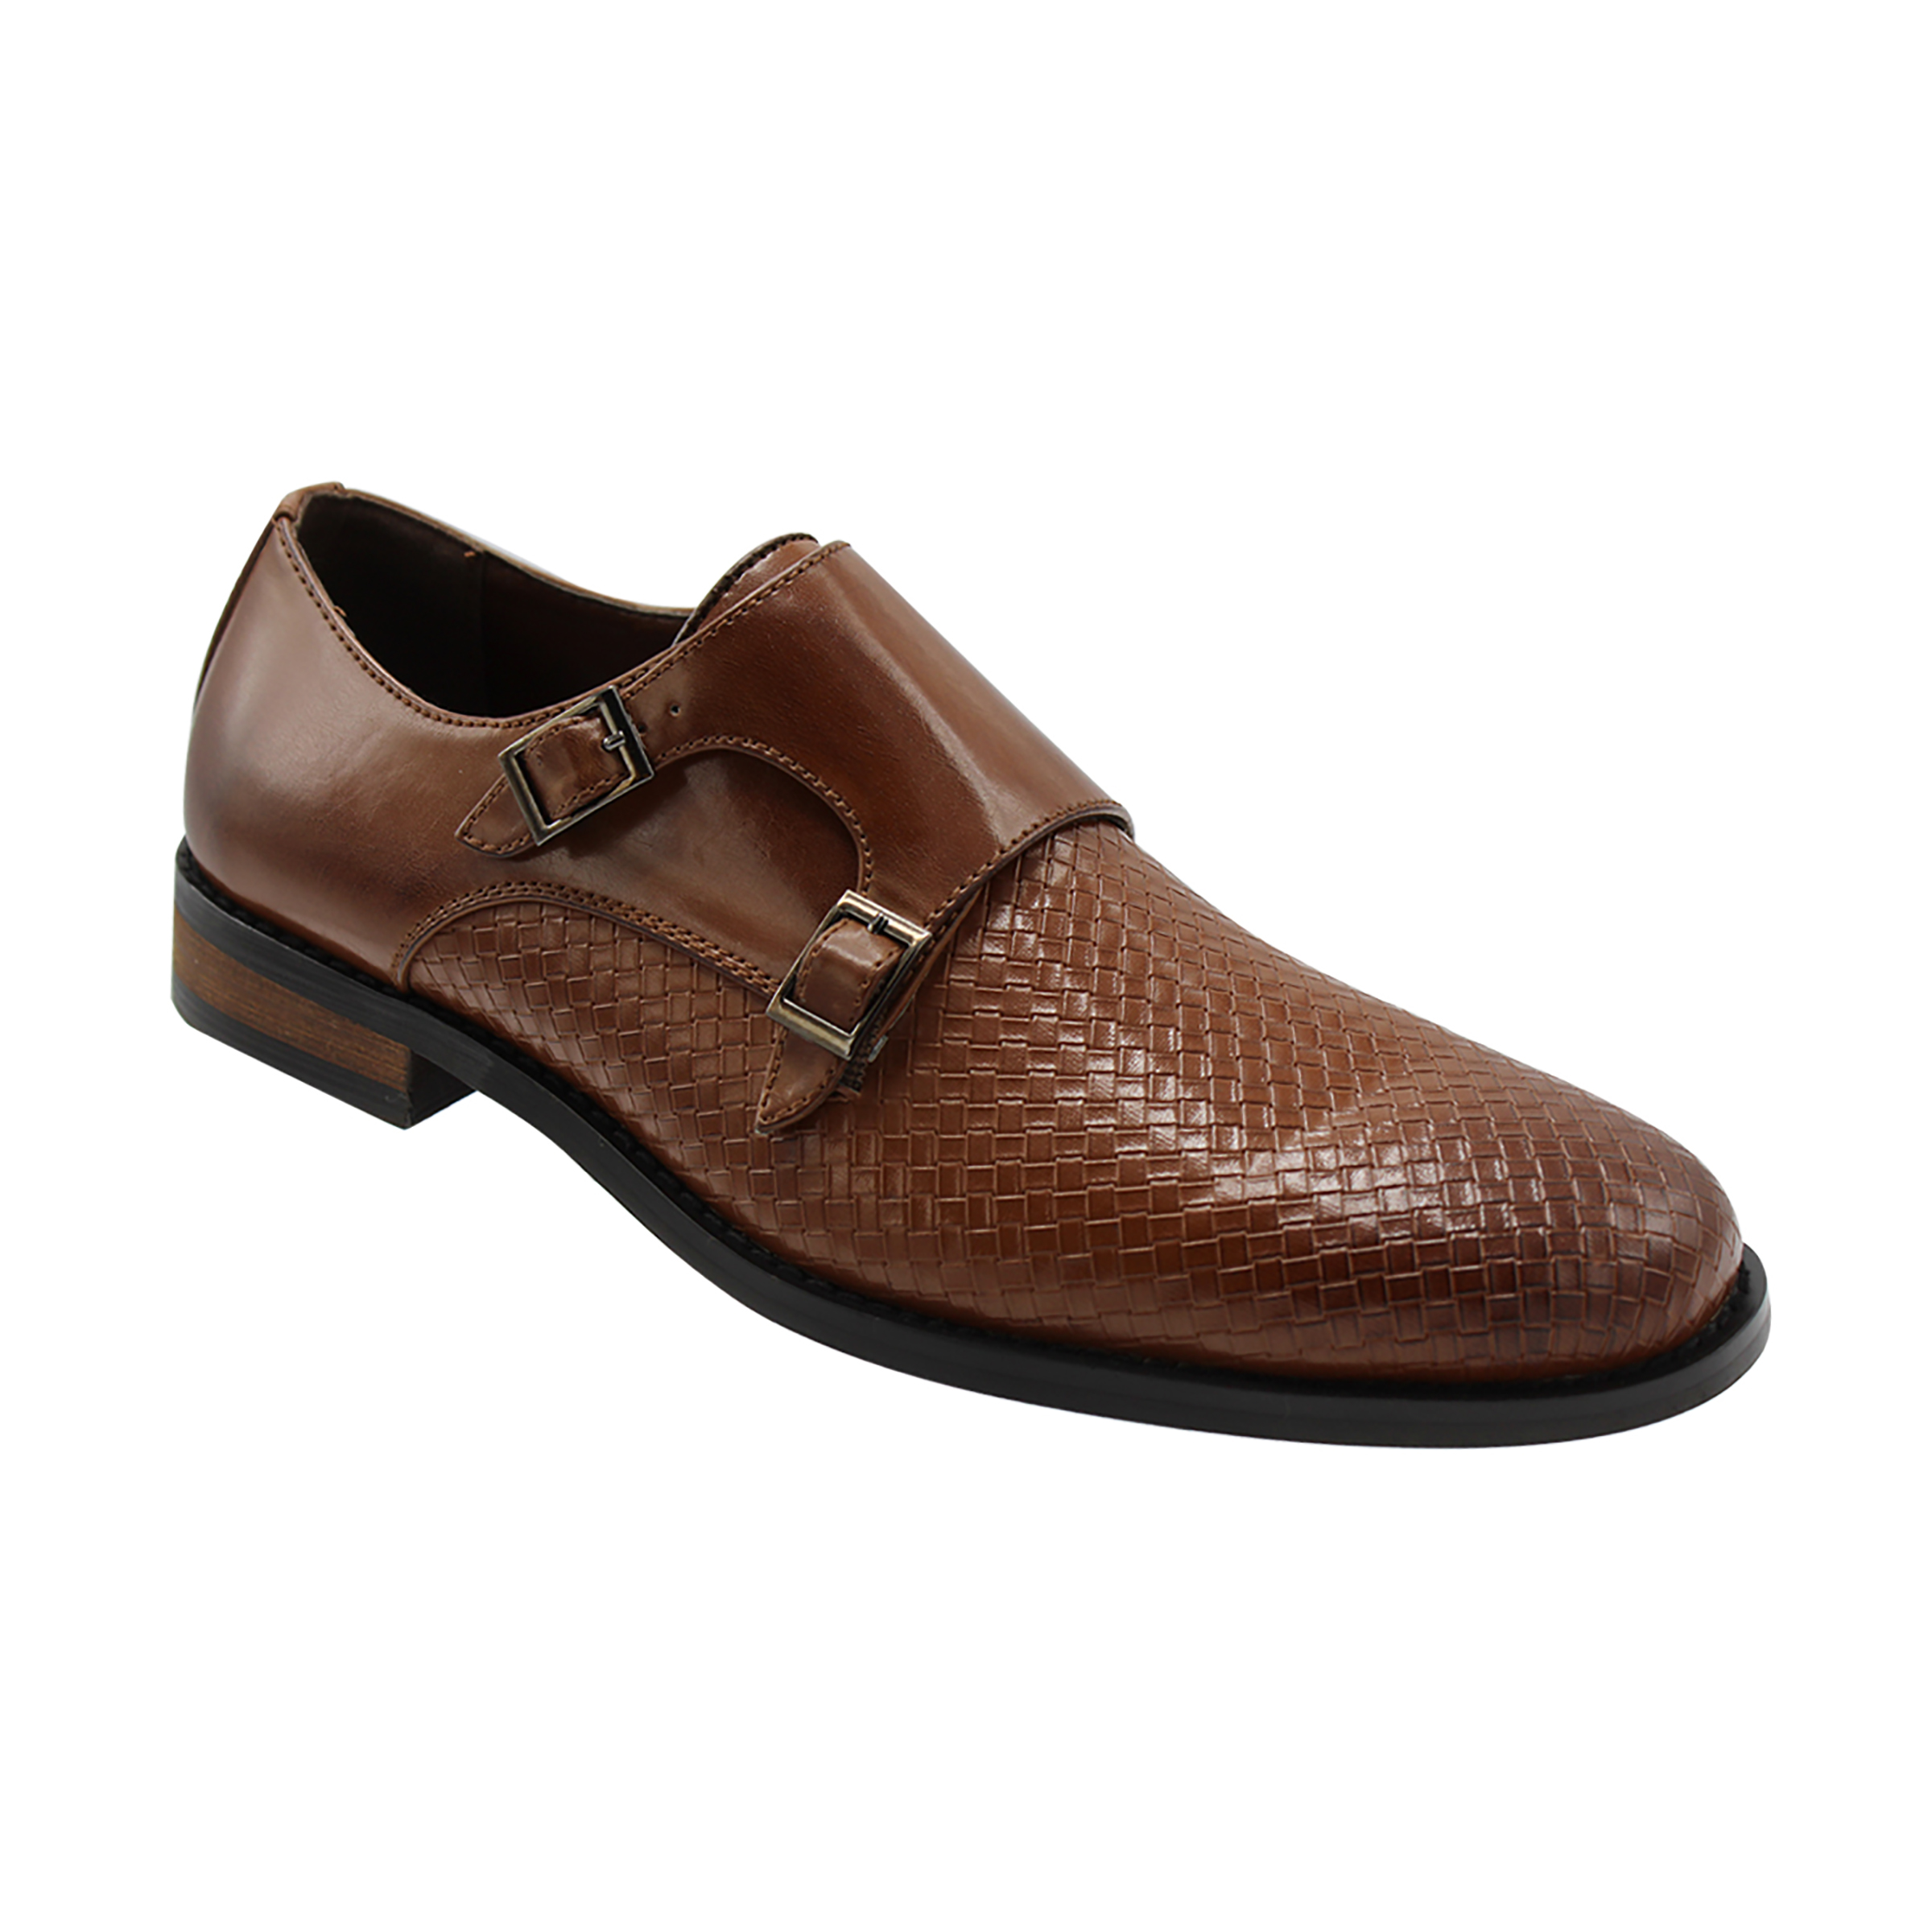 Men’s Double Monk Strap Slip On Formal Business Casual Comfortable Dress Shoes for Men - image 1 of 1